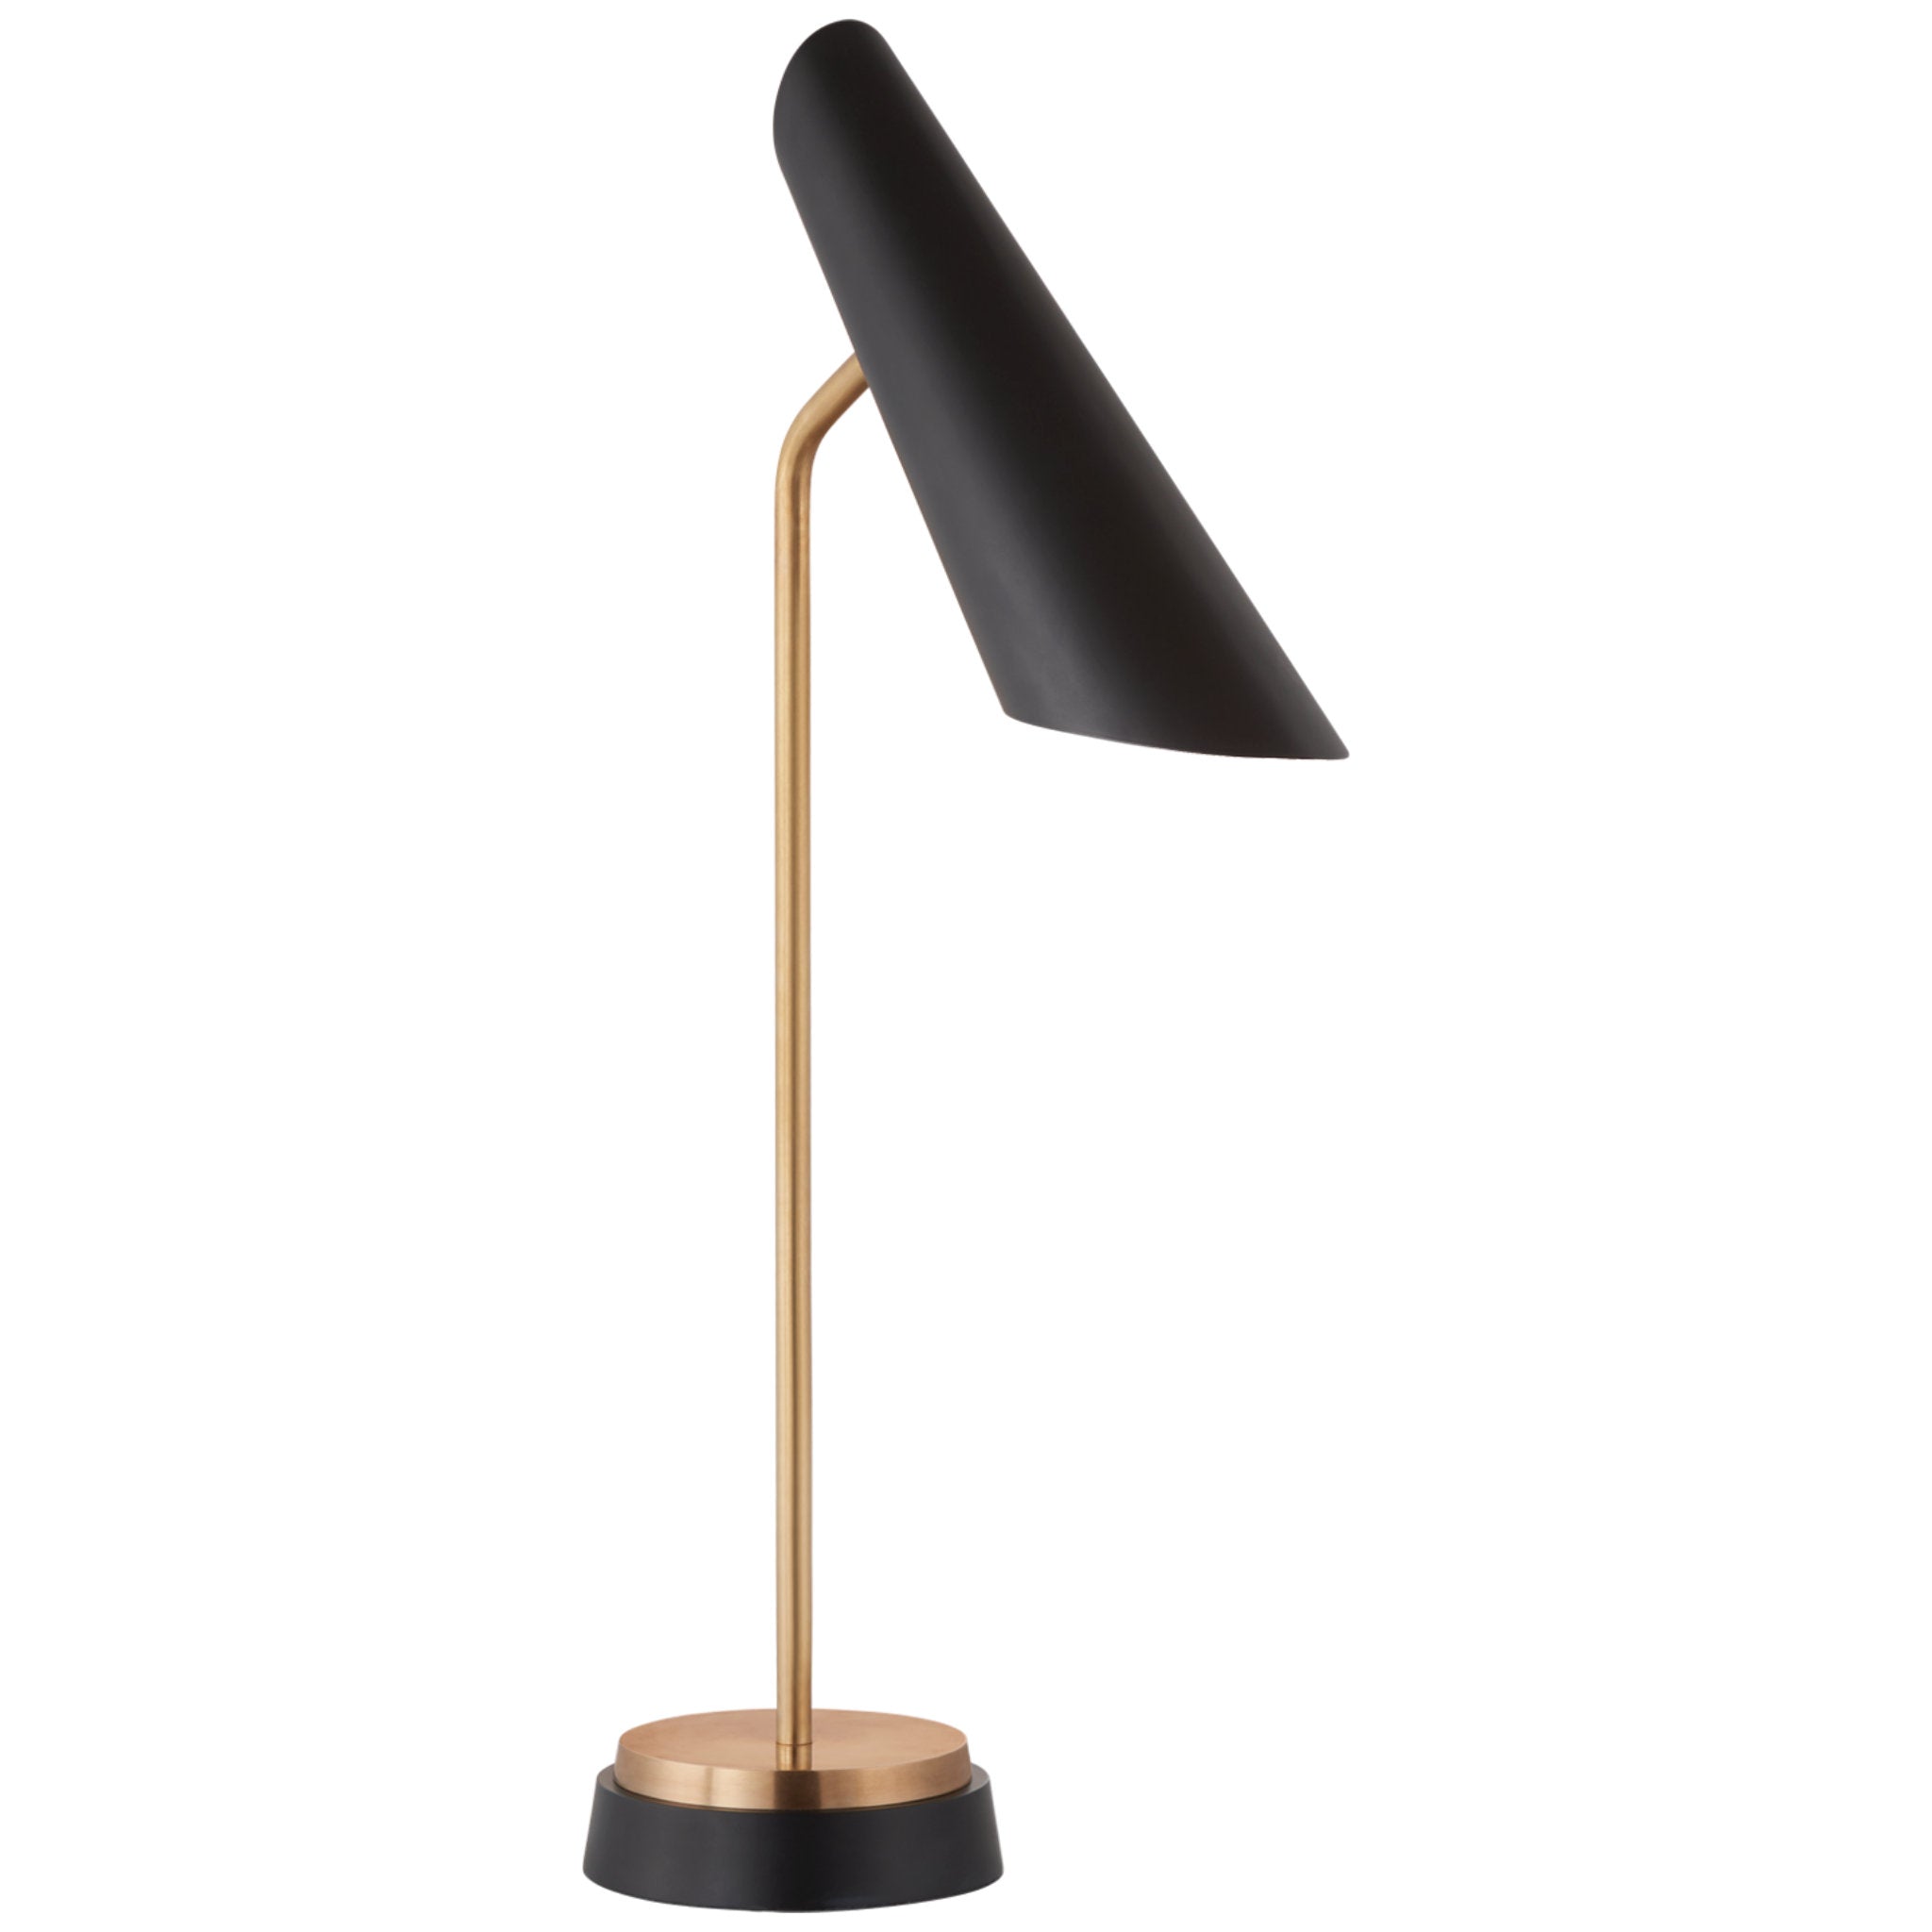 AERIN Franca Single Pivoting Task Lamp in Hand-Rubbed Antique Brass with Black Shade